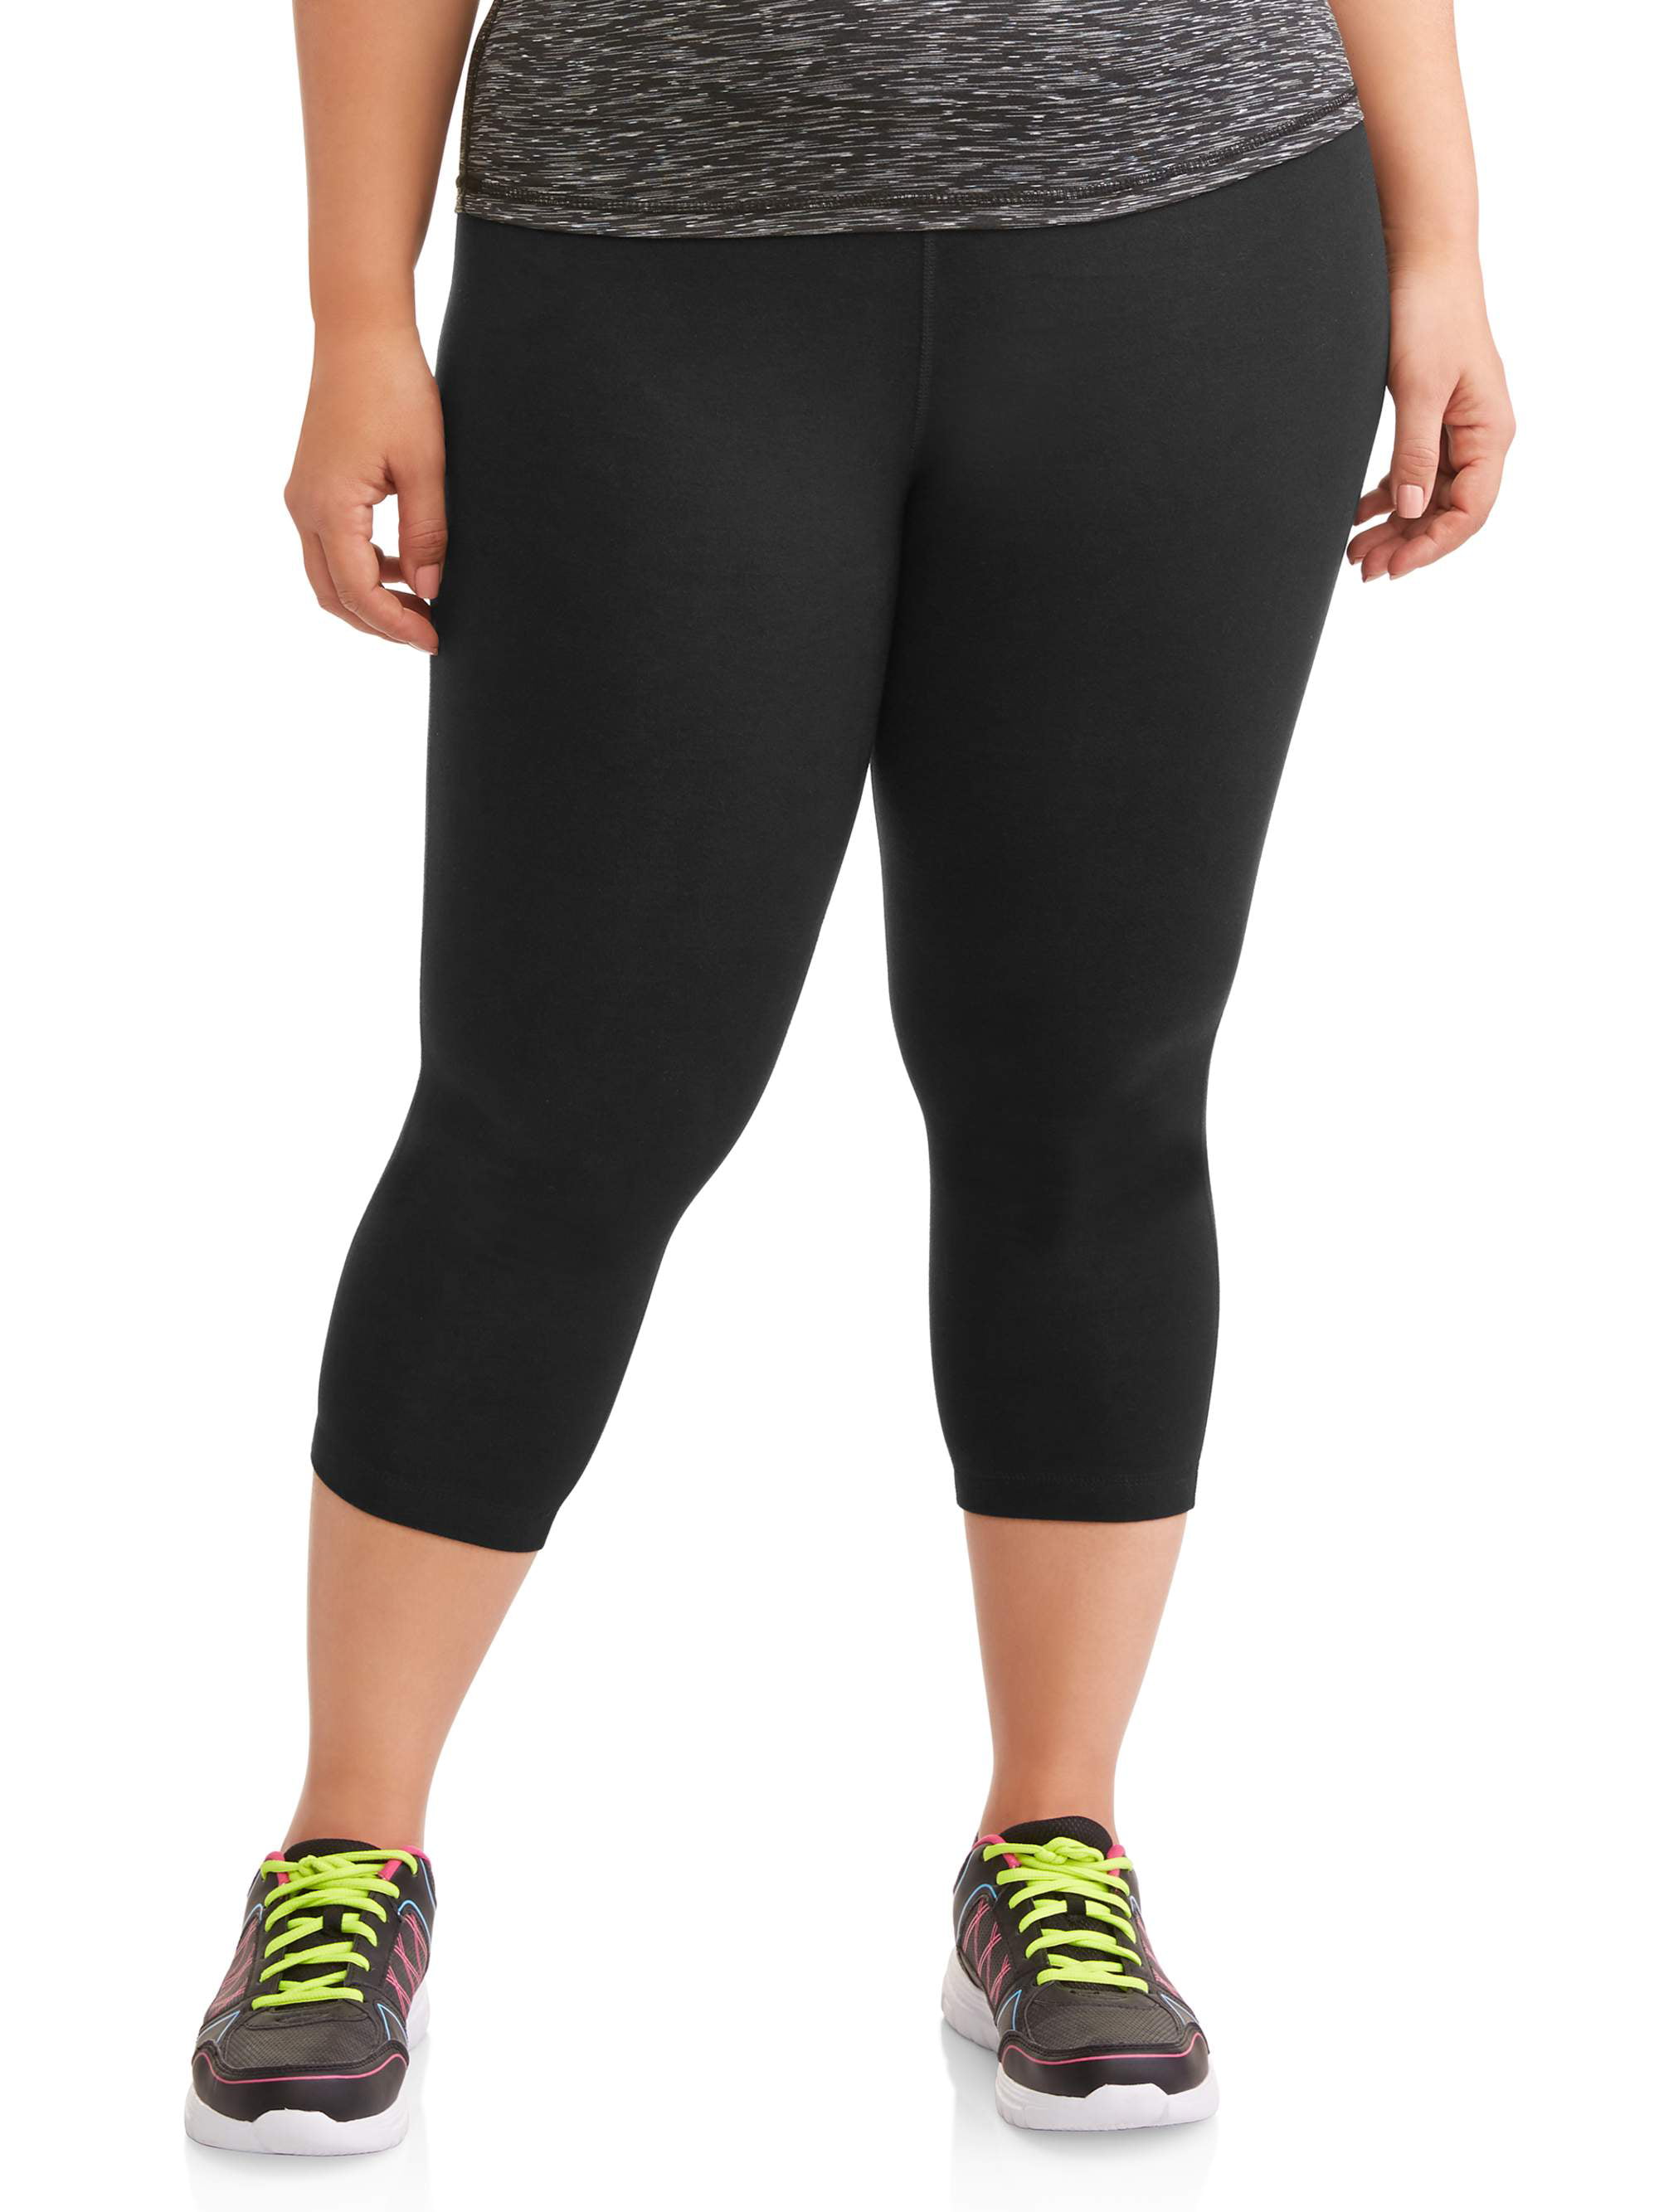 NEW YOUNG 3 Pack Plus Size Leggings with Pockets for Women,High Waist Tummy  Control Workout Yoga Pants